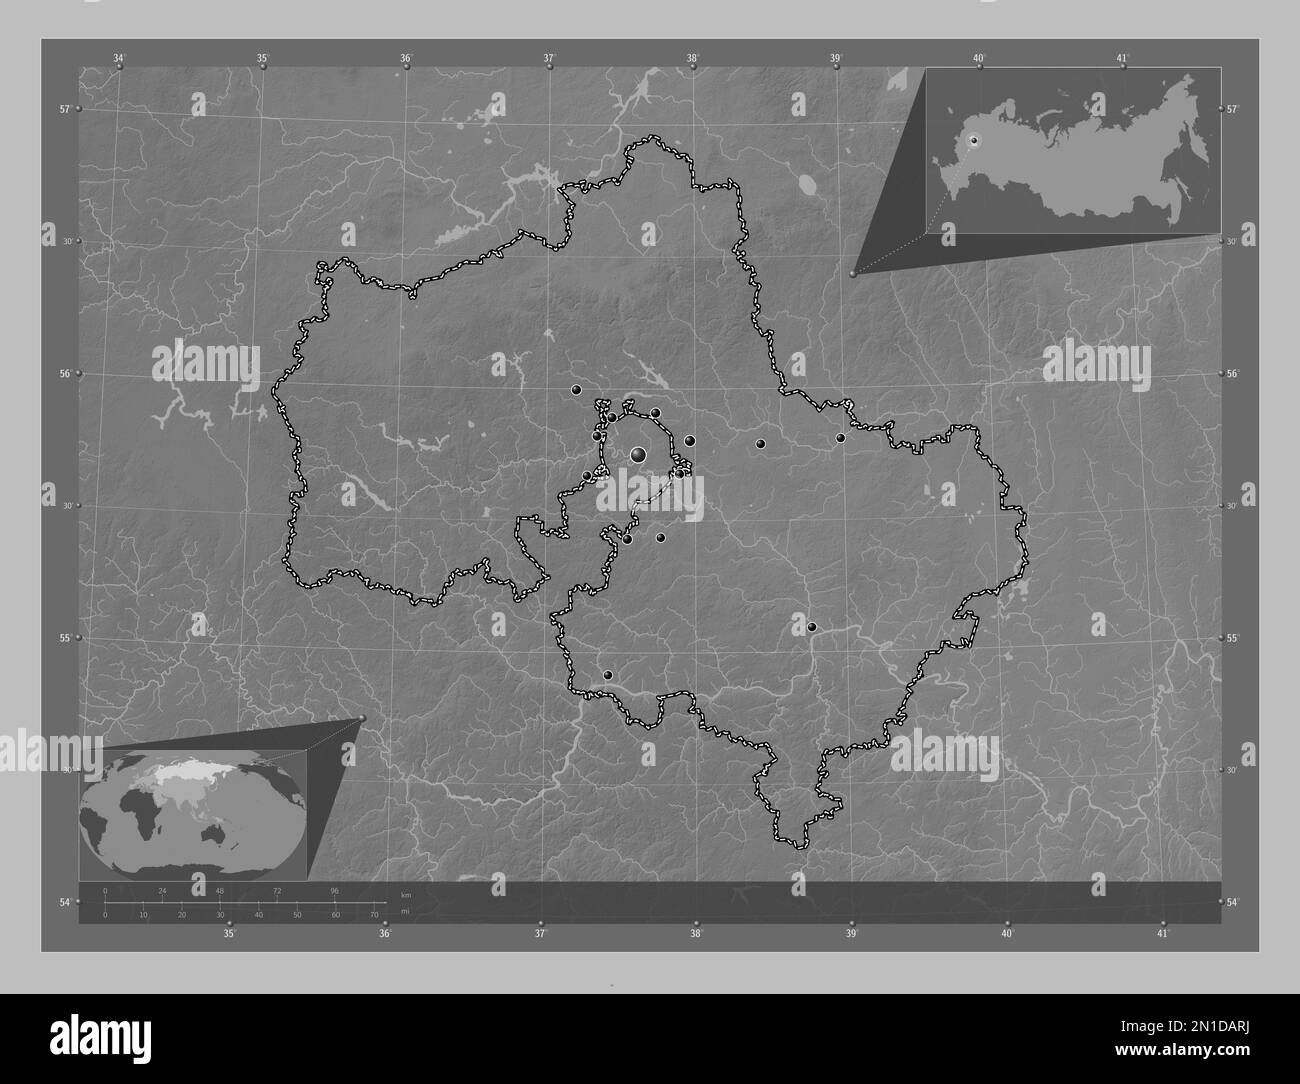 Moskva, region of Russia. Grayscale elevation map with lakes and rivers. Locations of major cities of the region. Corner auxiliary location maps Stock Photo